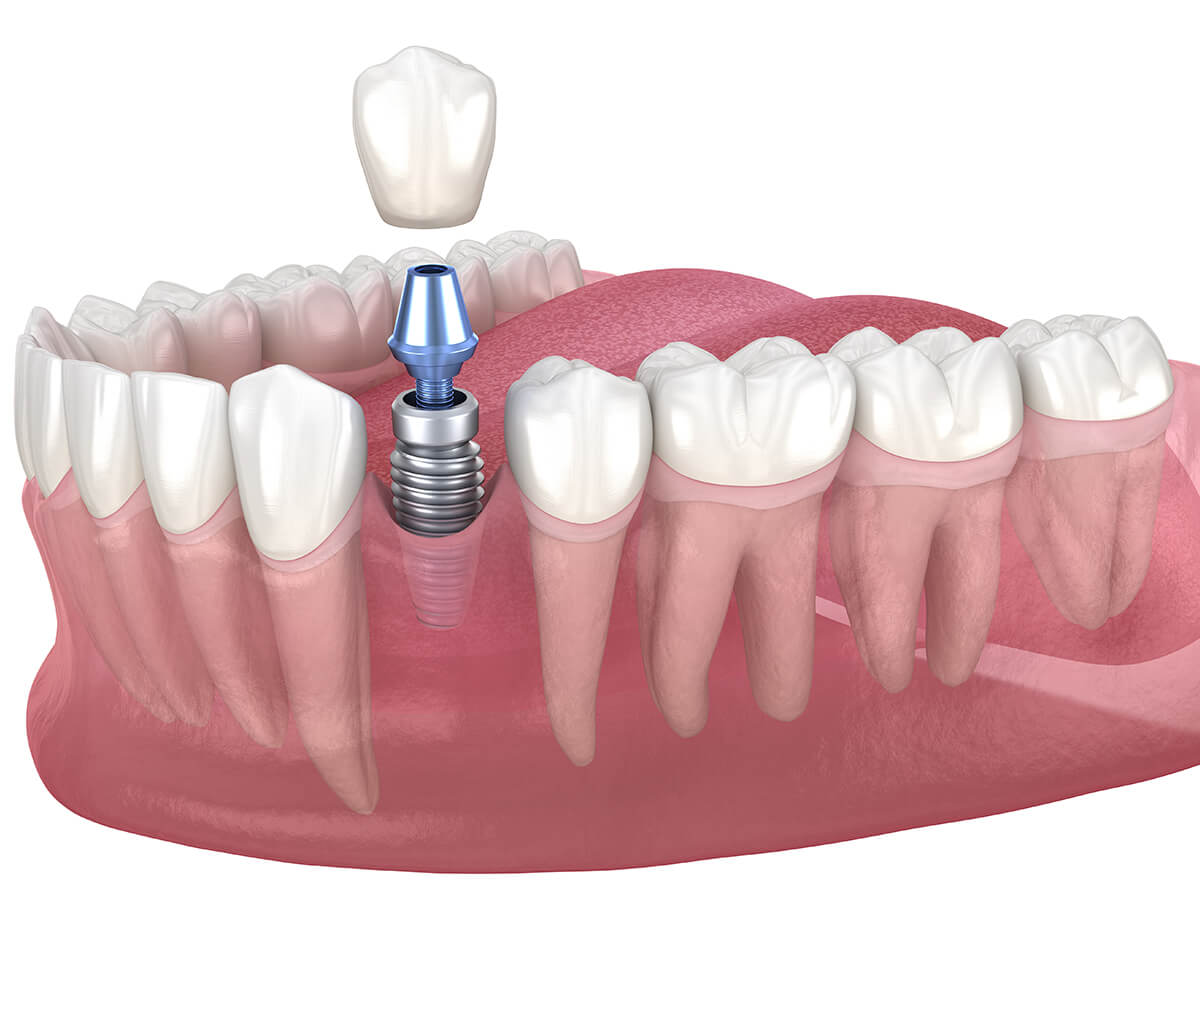 Looking for Dental Implants in Aliso Viejo CA Area